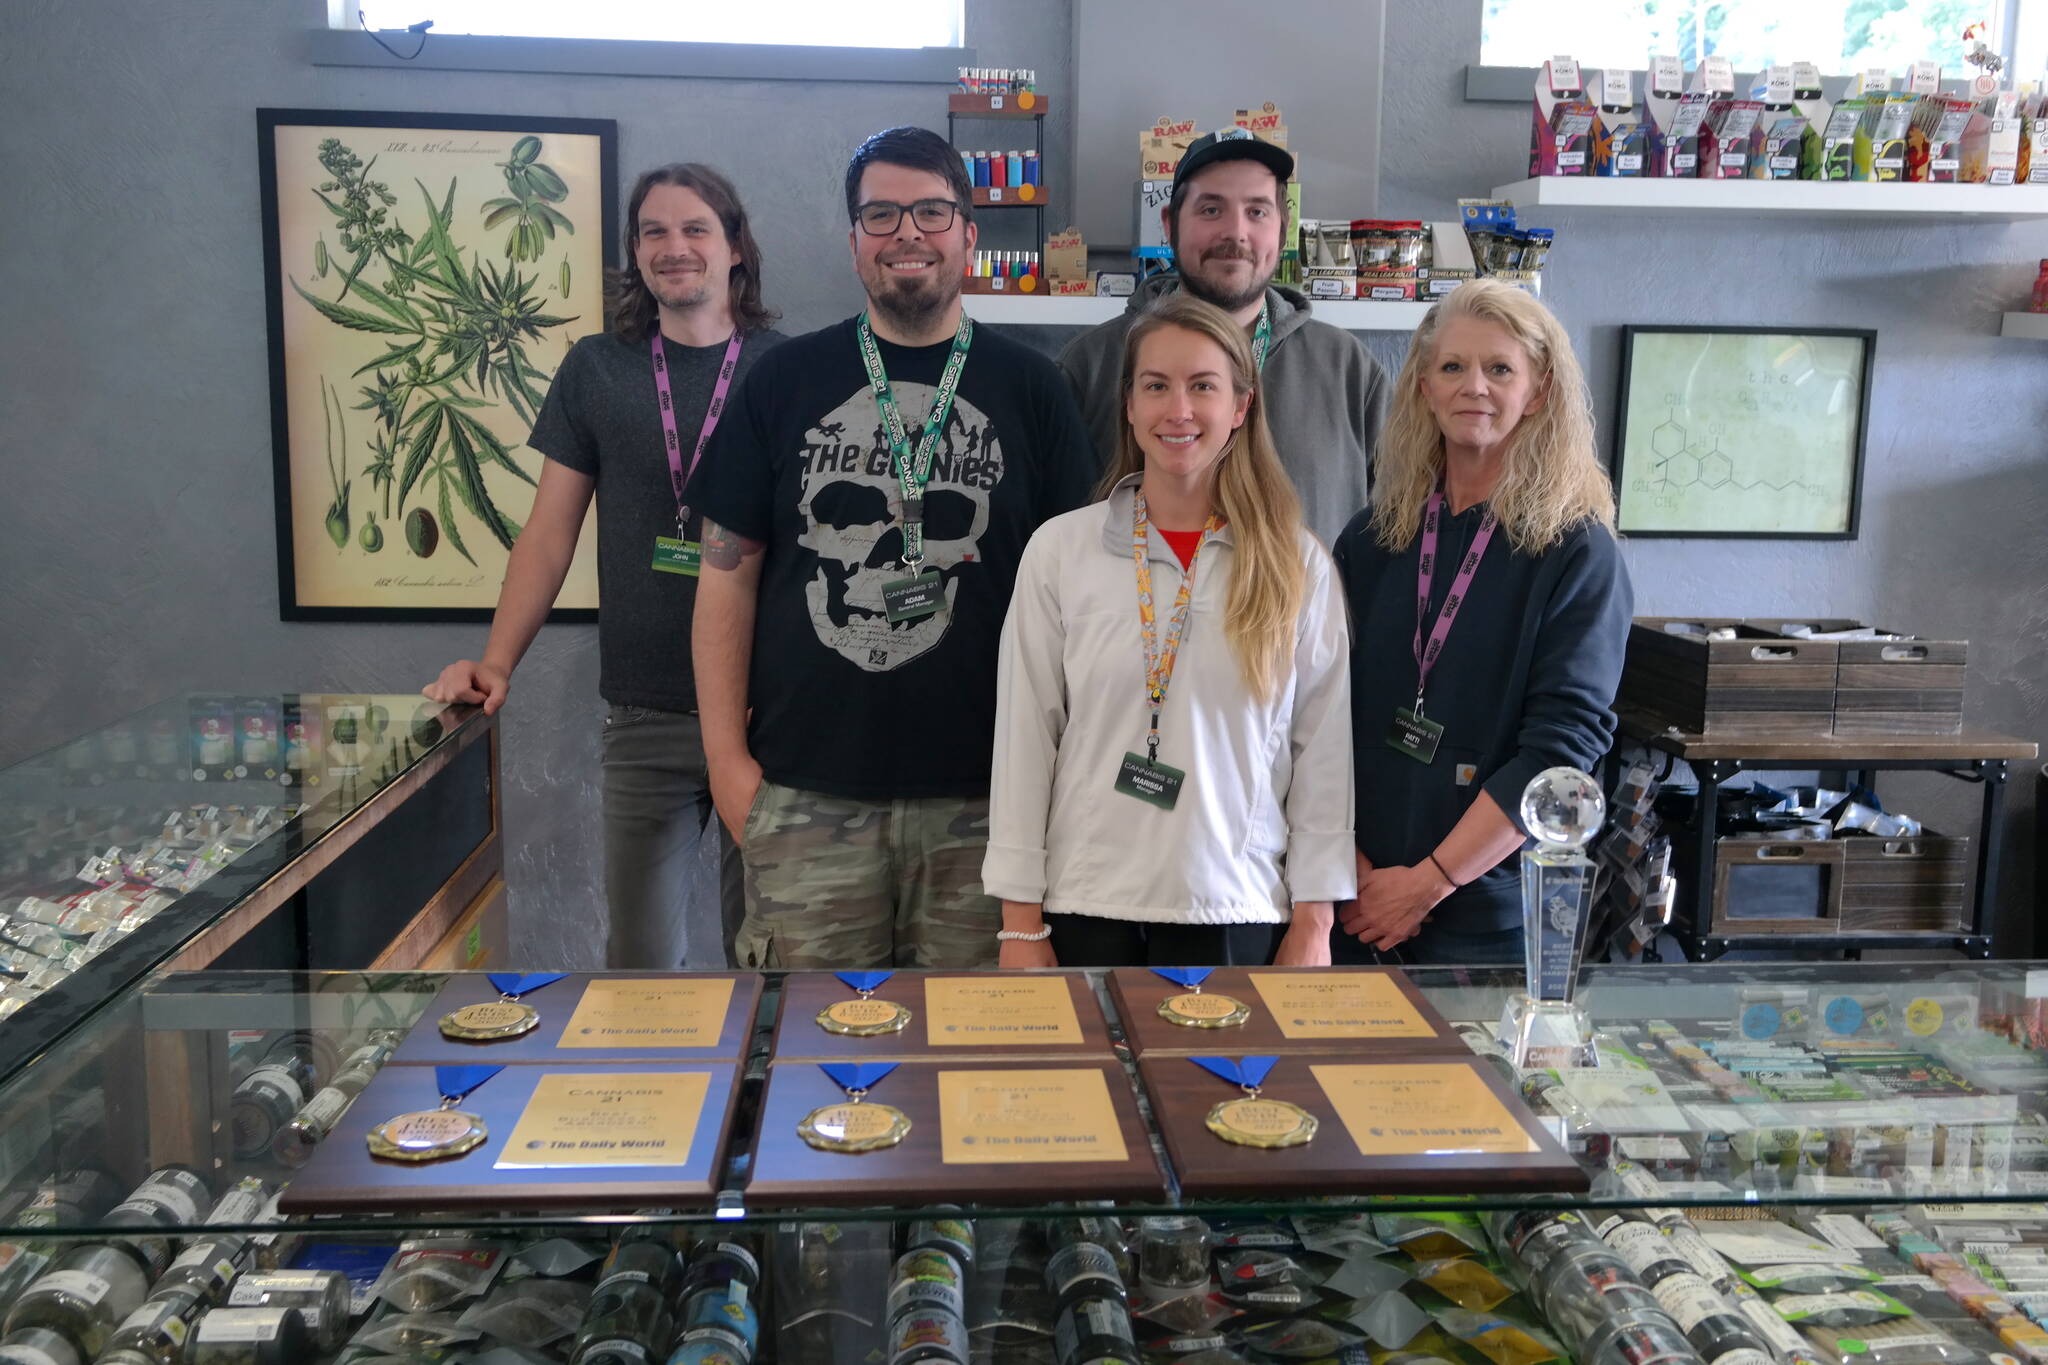 The Cannabis 21 Aberdeen branch staff enjoy their recent slew of awards from the Best of Twin Harbors 2022 competition, including "Best Business in Aberdeen," "Best Business in Hoquiam," and "Best Business in North Beach." 
From left to right: John Krasowki, Adam Bakotich, Marissa Aube, Colton Gwinn, and Patti Watson. 
Erika Gebhardt I The Daily World